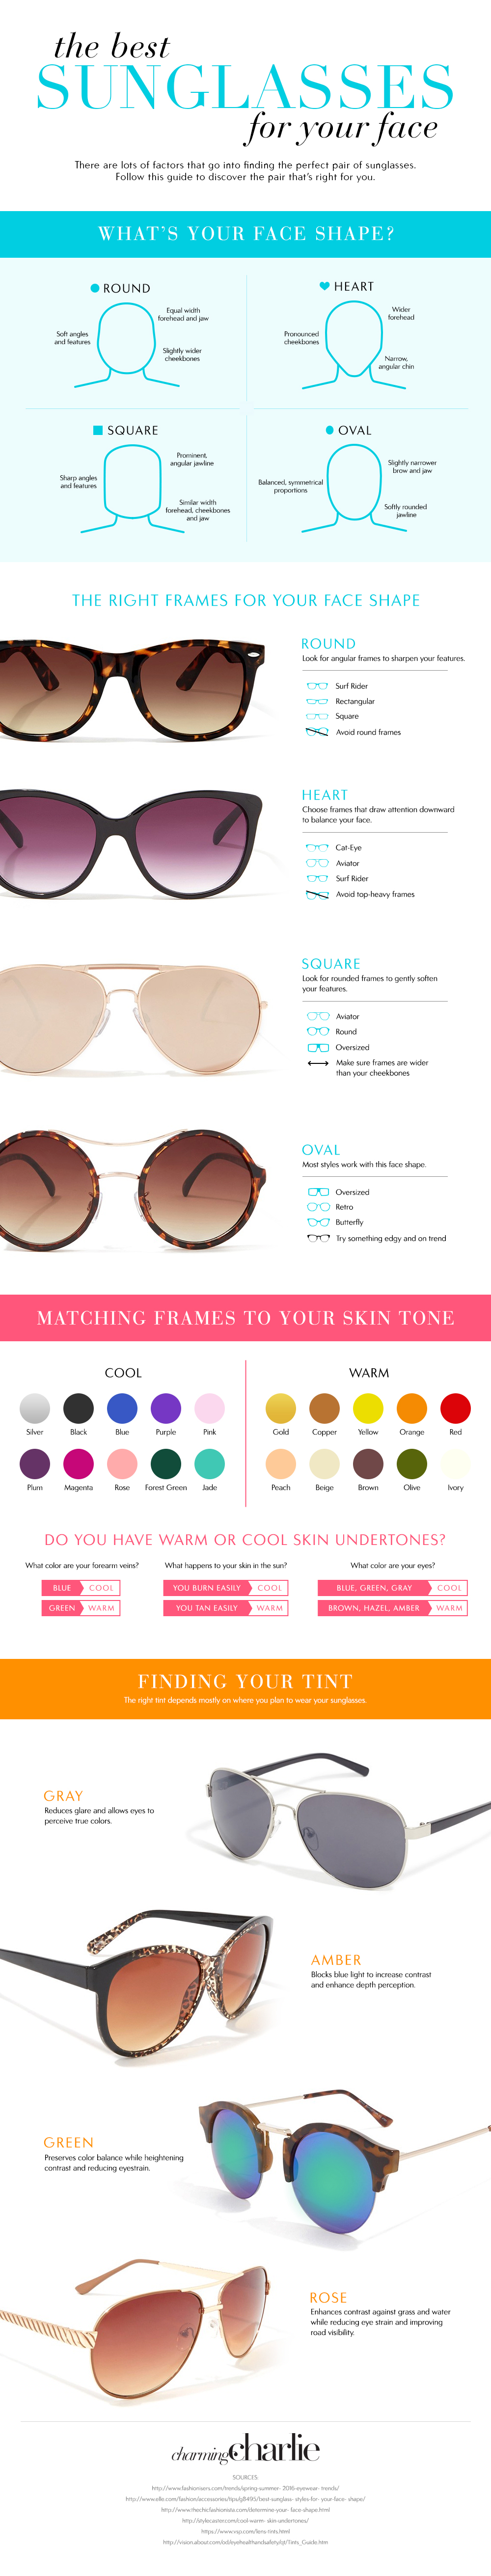 The Best Sunglasses For Your Face